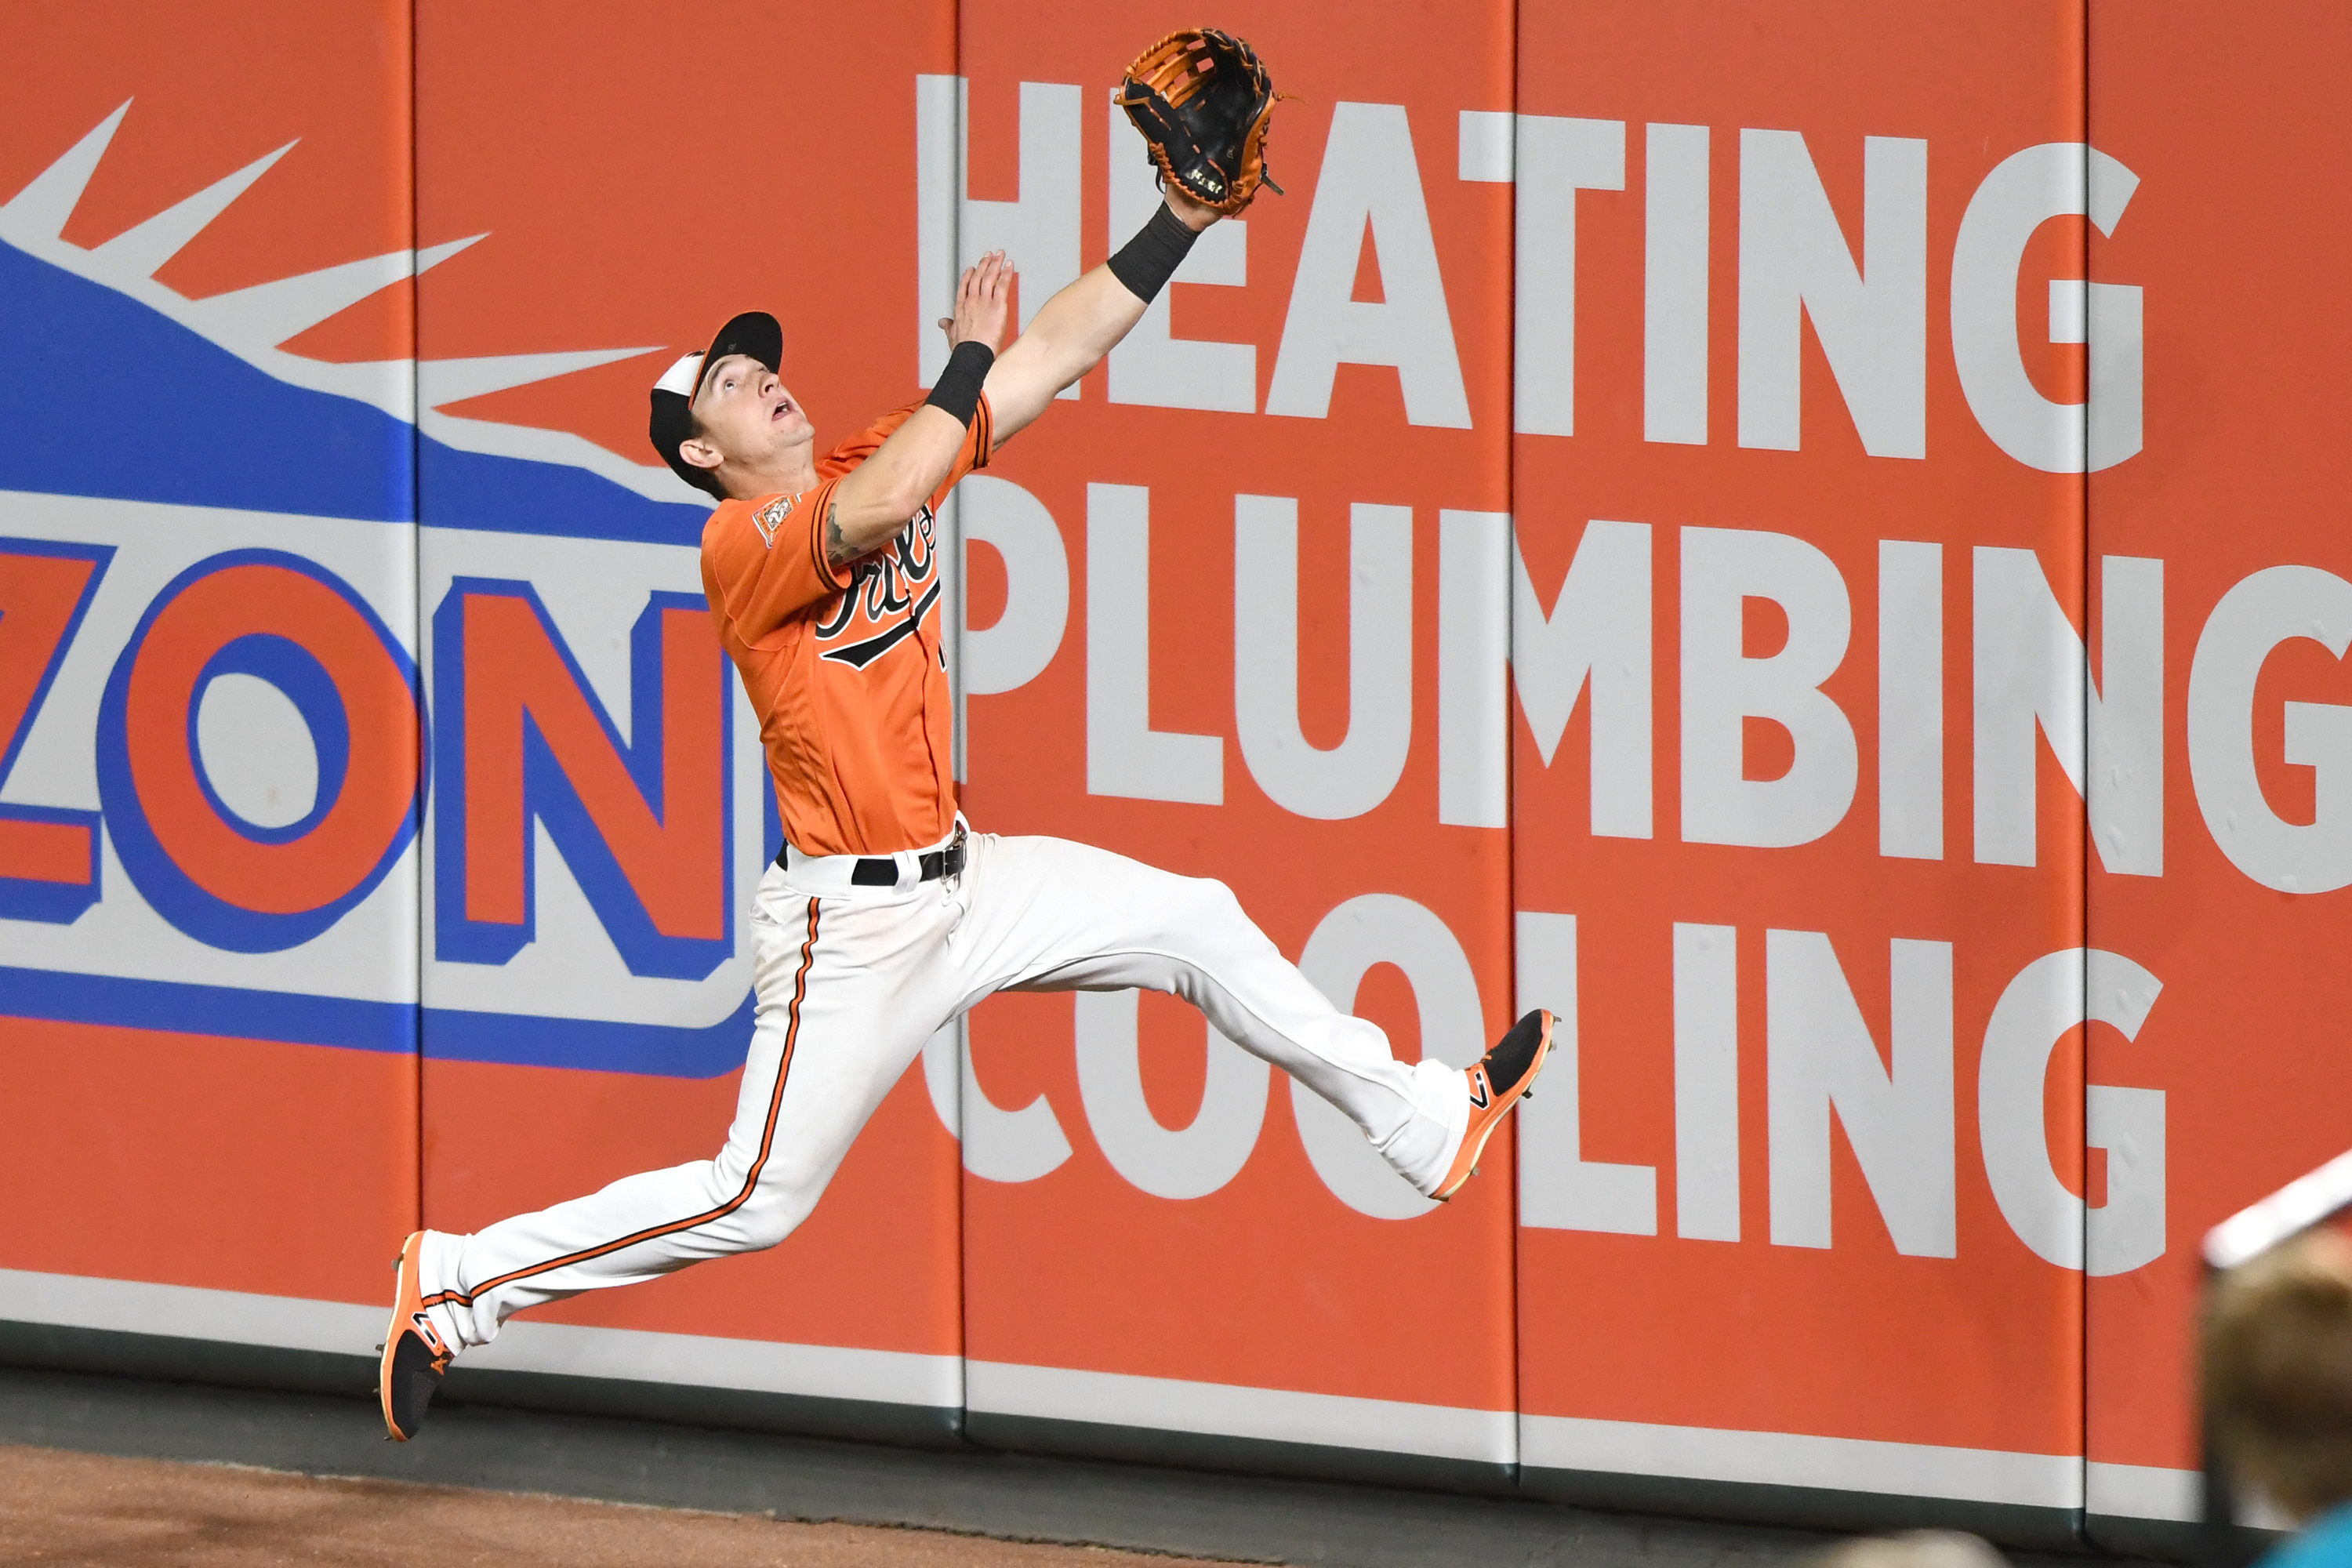 Baltimore Orioles on X: Retweet this if you're excited to have